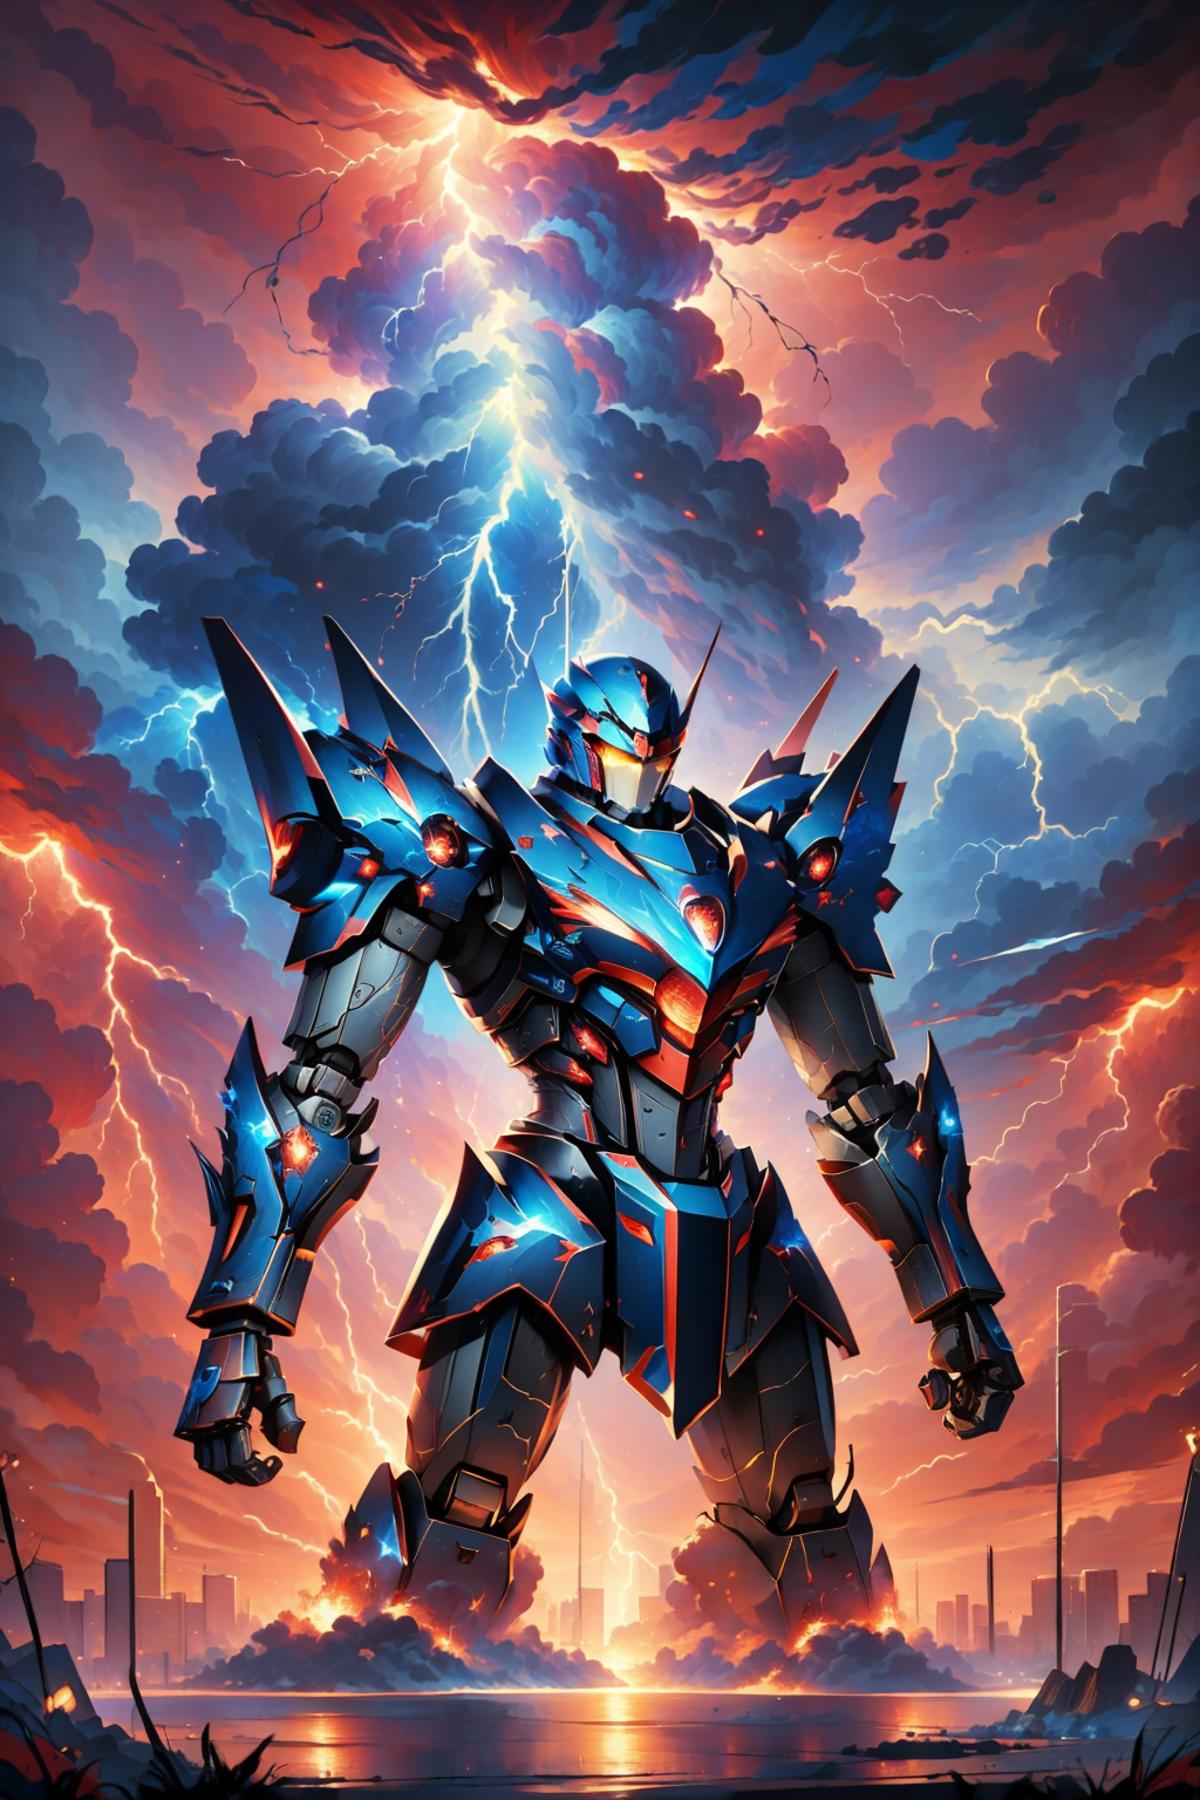 Anime Robot with Blue and Red Color Scheme and a Thunderstorm Background